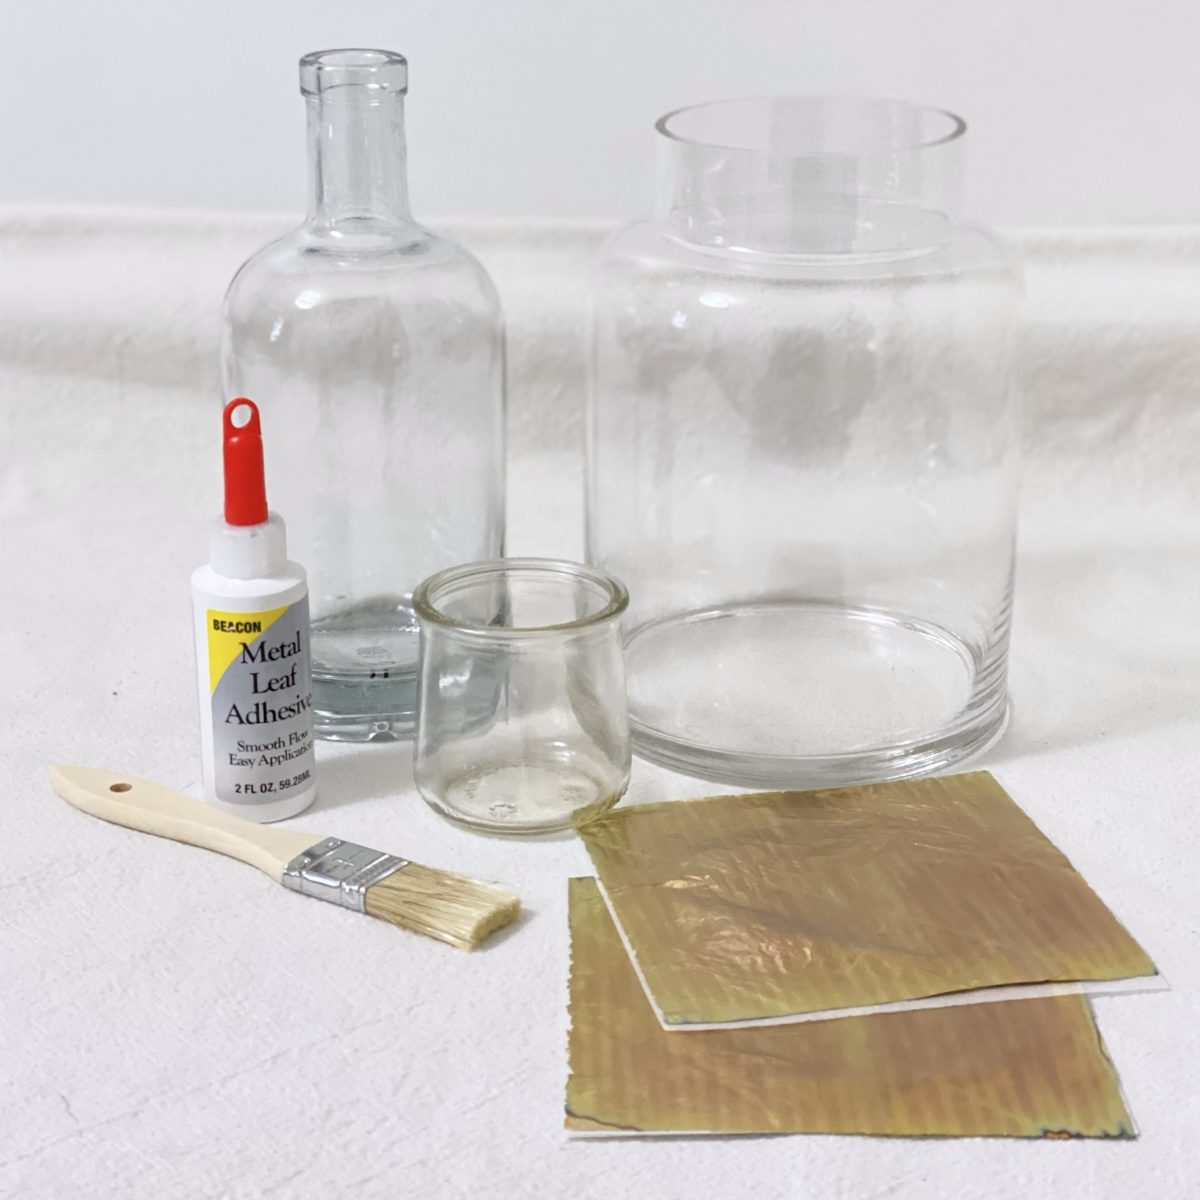 Items needed to make a DIY gold leaf vase including a glass vase, gold leaf sheets, adhesive, and a paint brush.